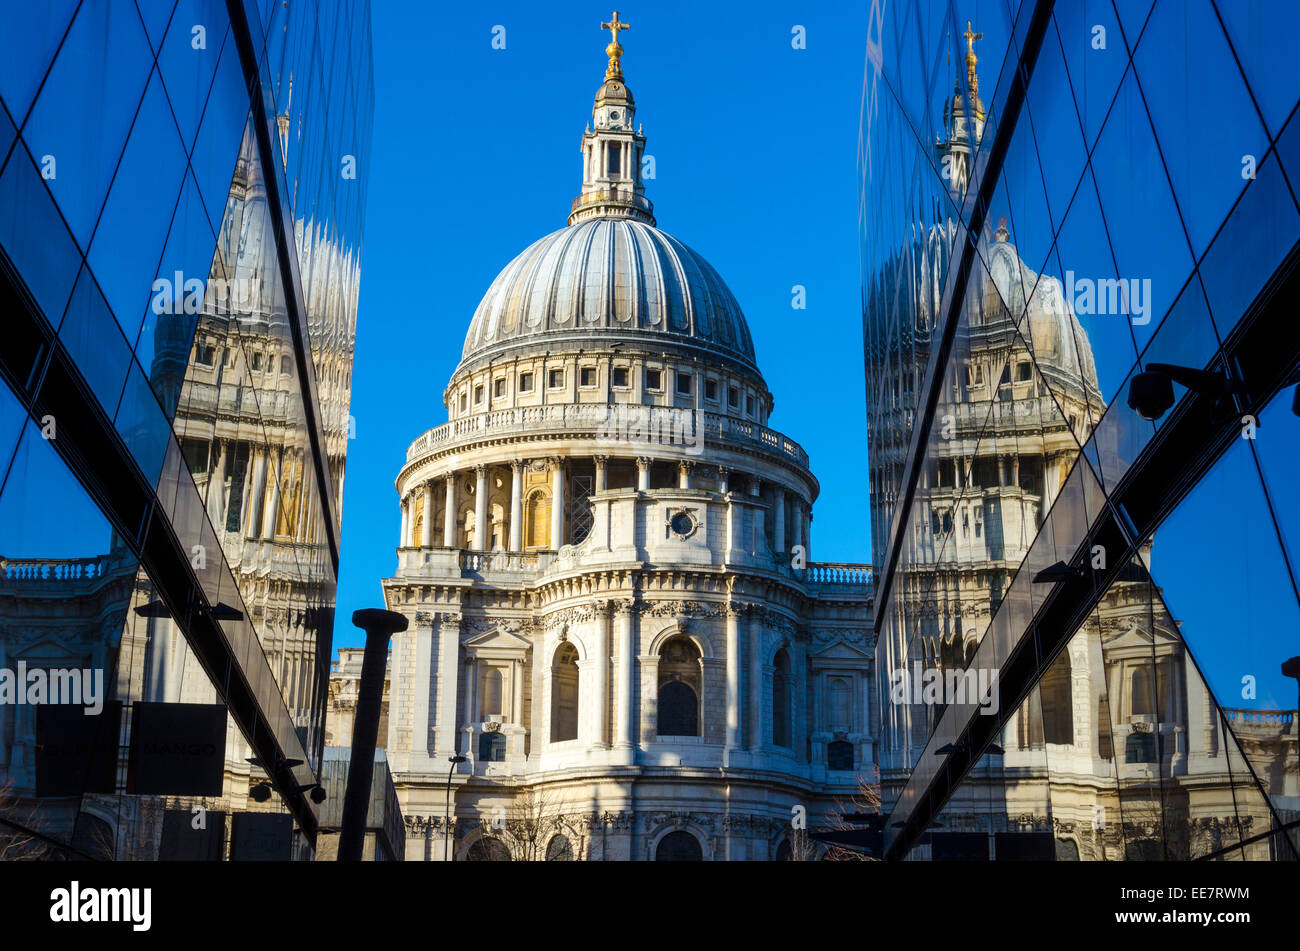 St Paul's Cathedral reflected in the glass of One New Change shopping centre. City of London, UK Stock Photo